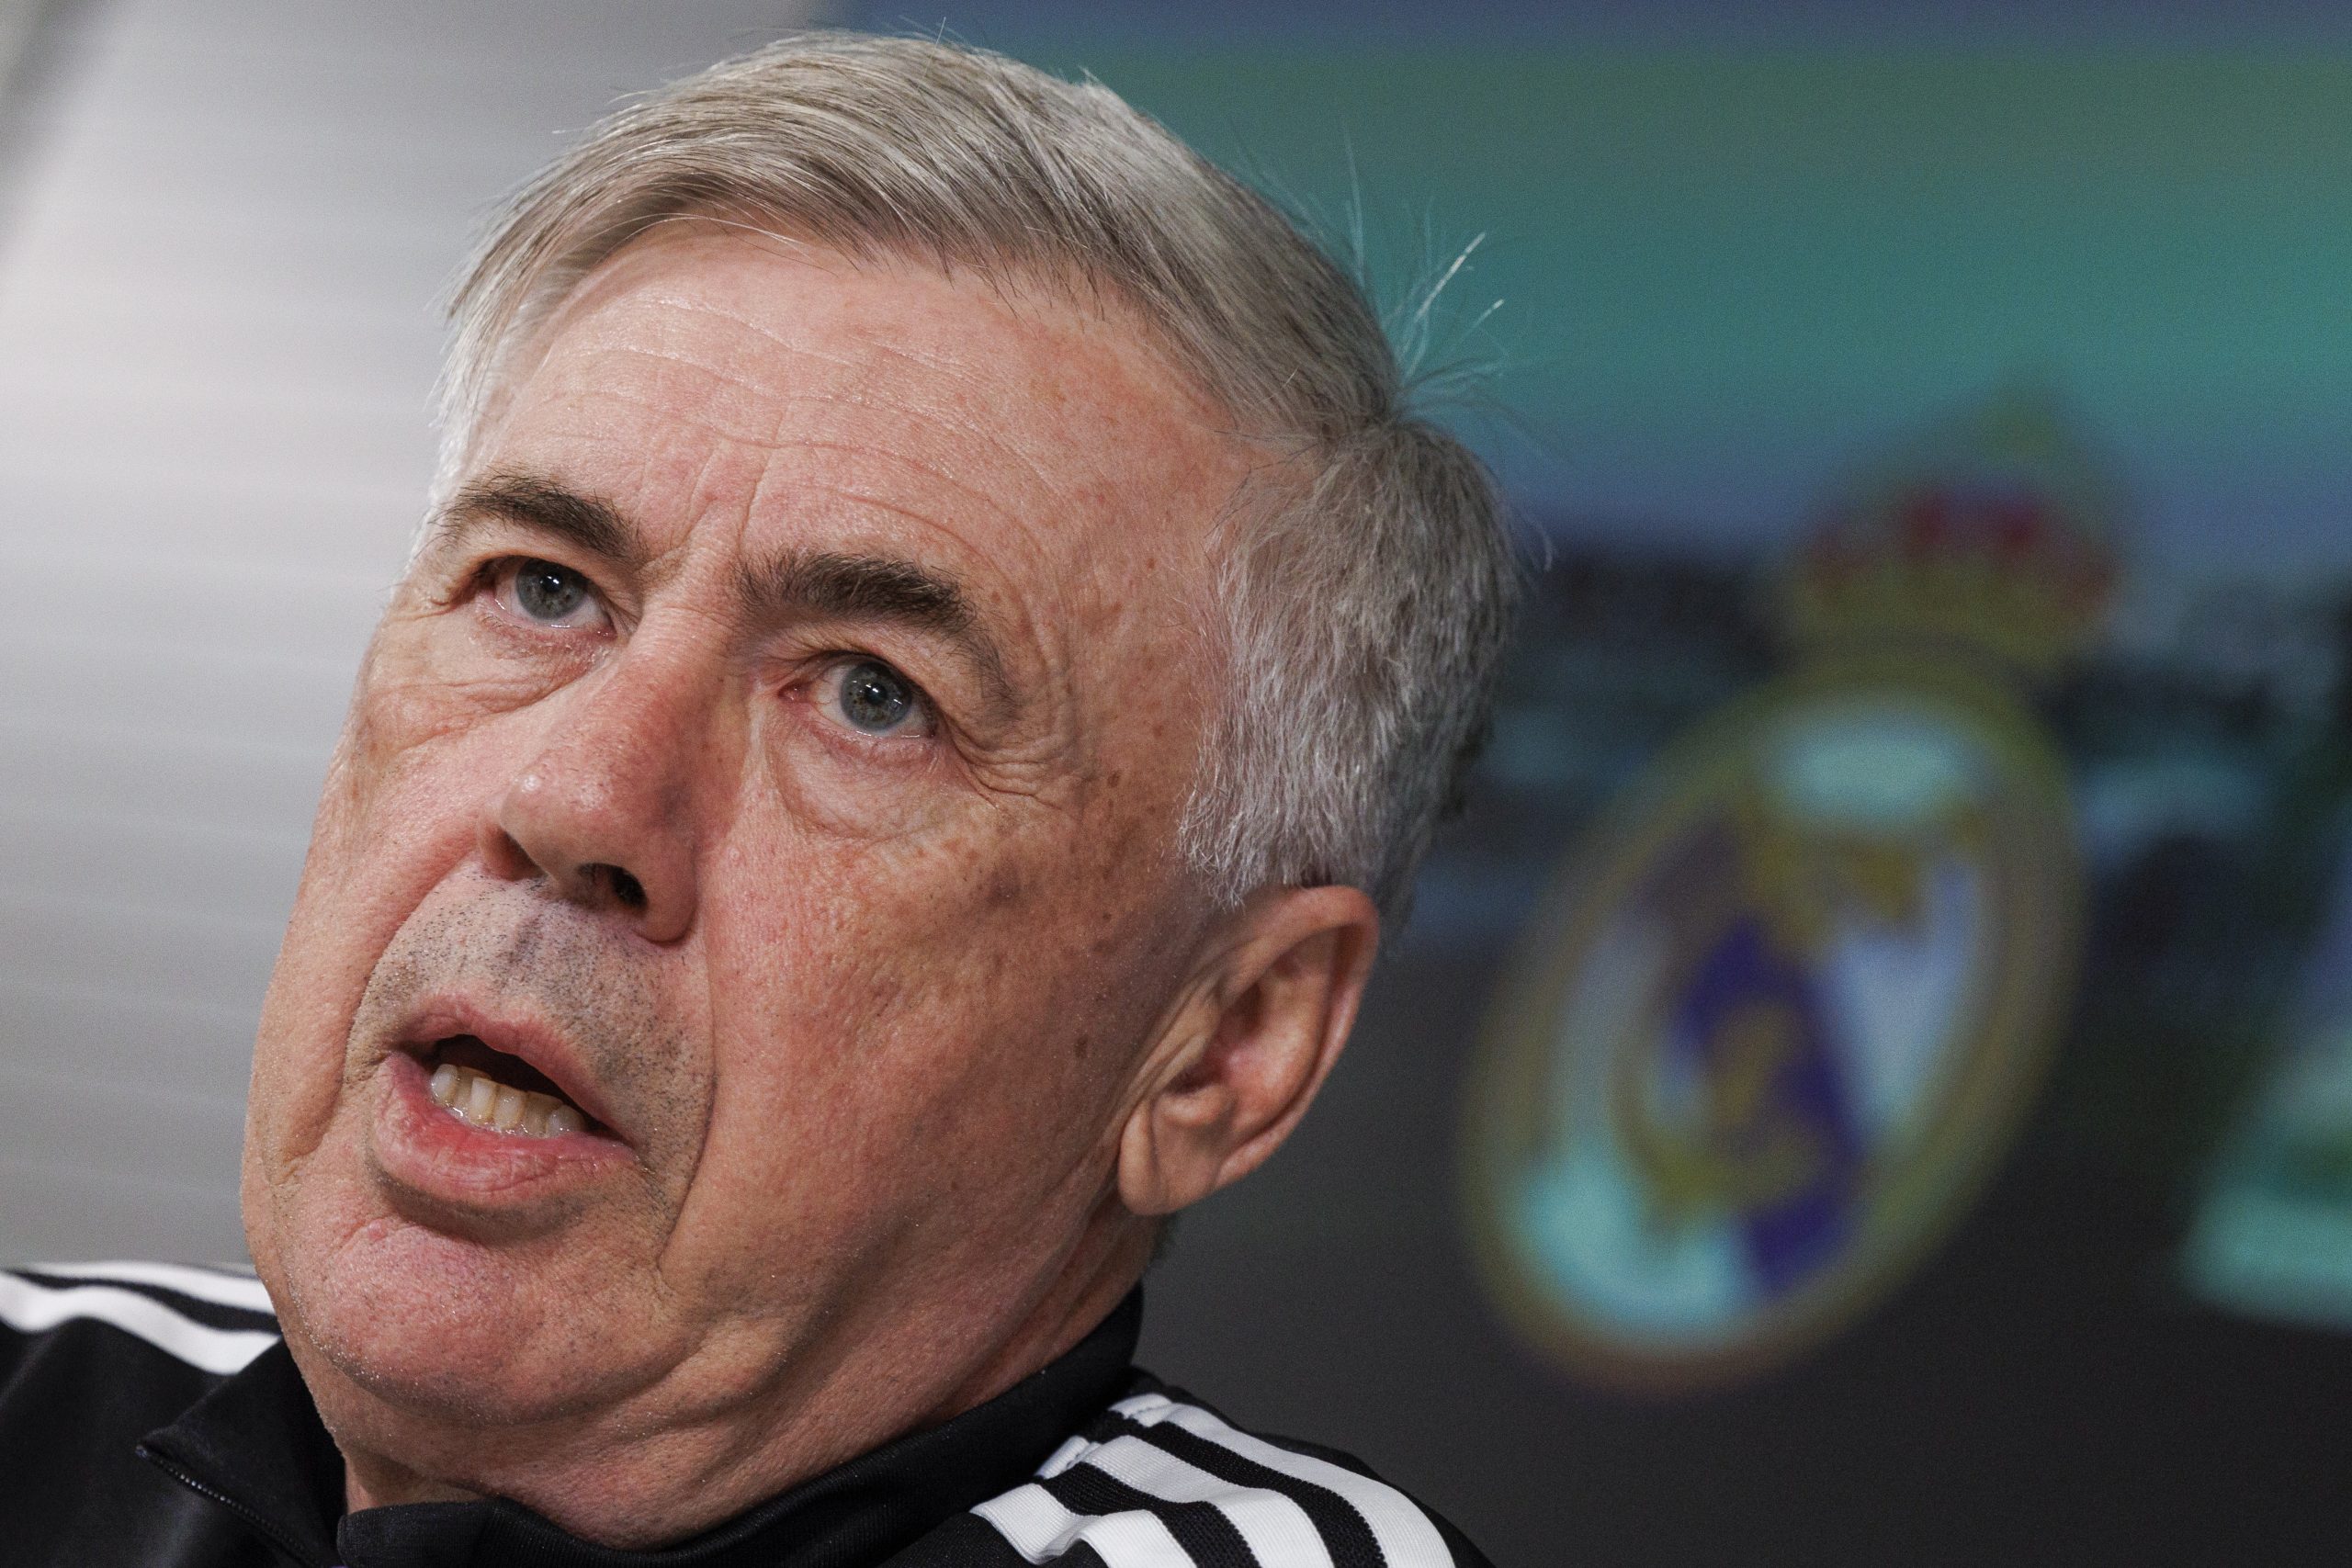 epa10502379 Real Madrid's head coach Carlo Ancelotti attends a press conference following the team's training session held at Valdebebas sports complex, Madrid, Spain, 04 March 2023. Real Madrid will face Real Betis in a Spanish LaLiga soccer match on 05 March 2023.  EPA/Sergio Perez